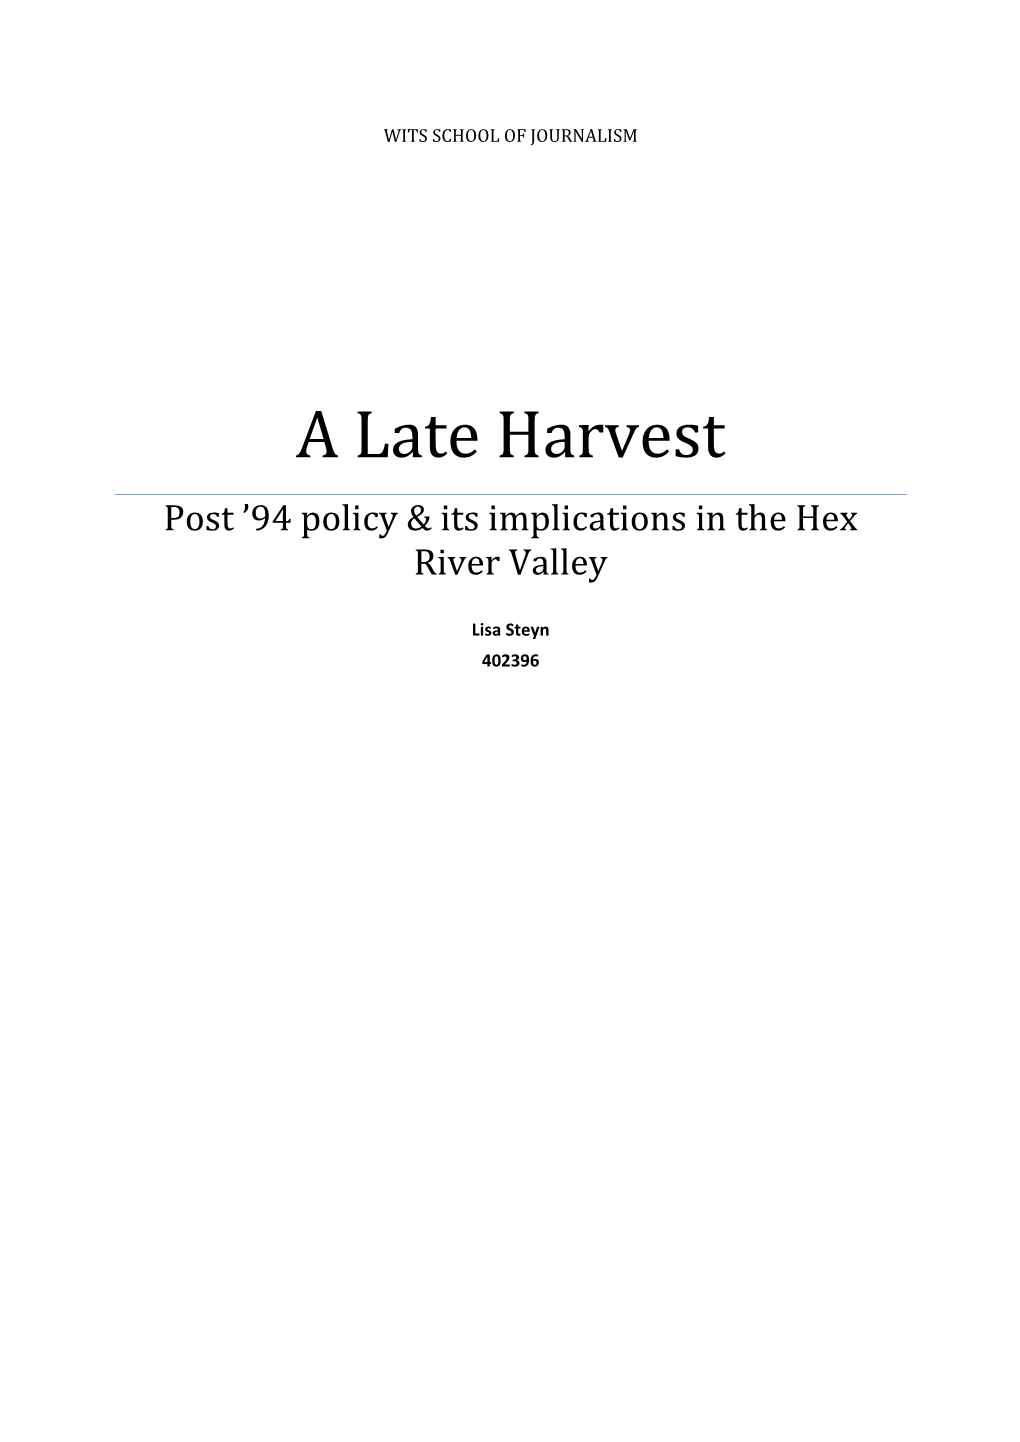 A Late Harvest Post ’94 Policy & Its Implications in the Hex River Valley